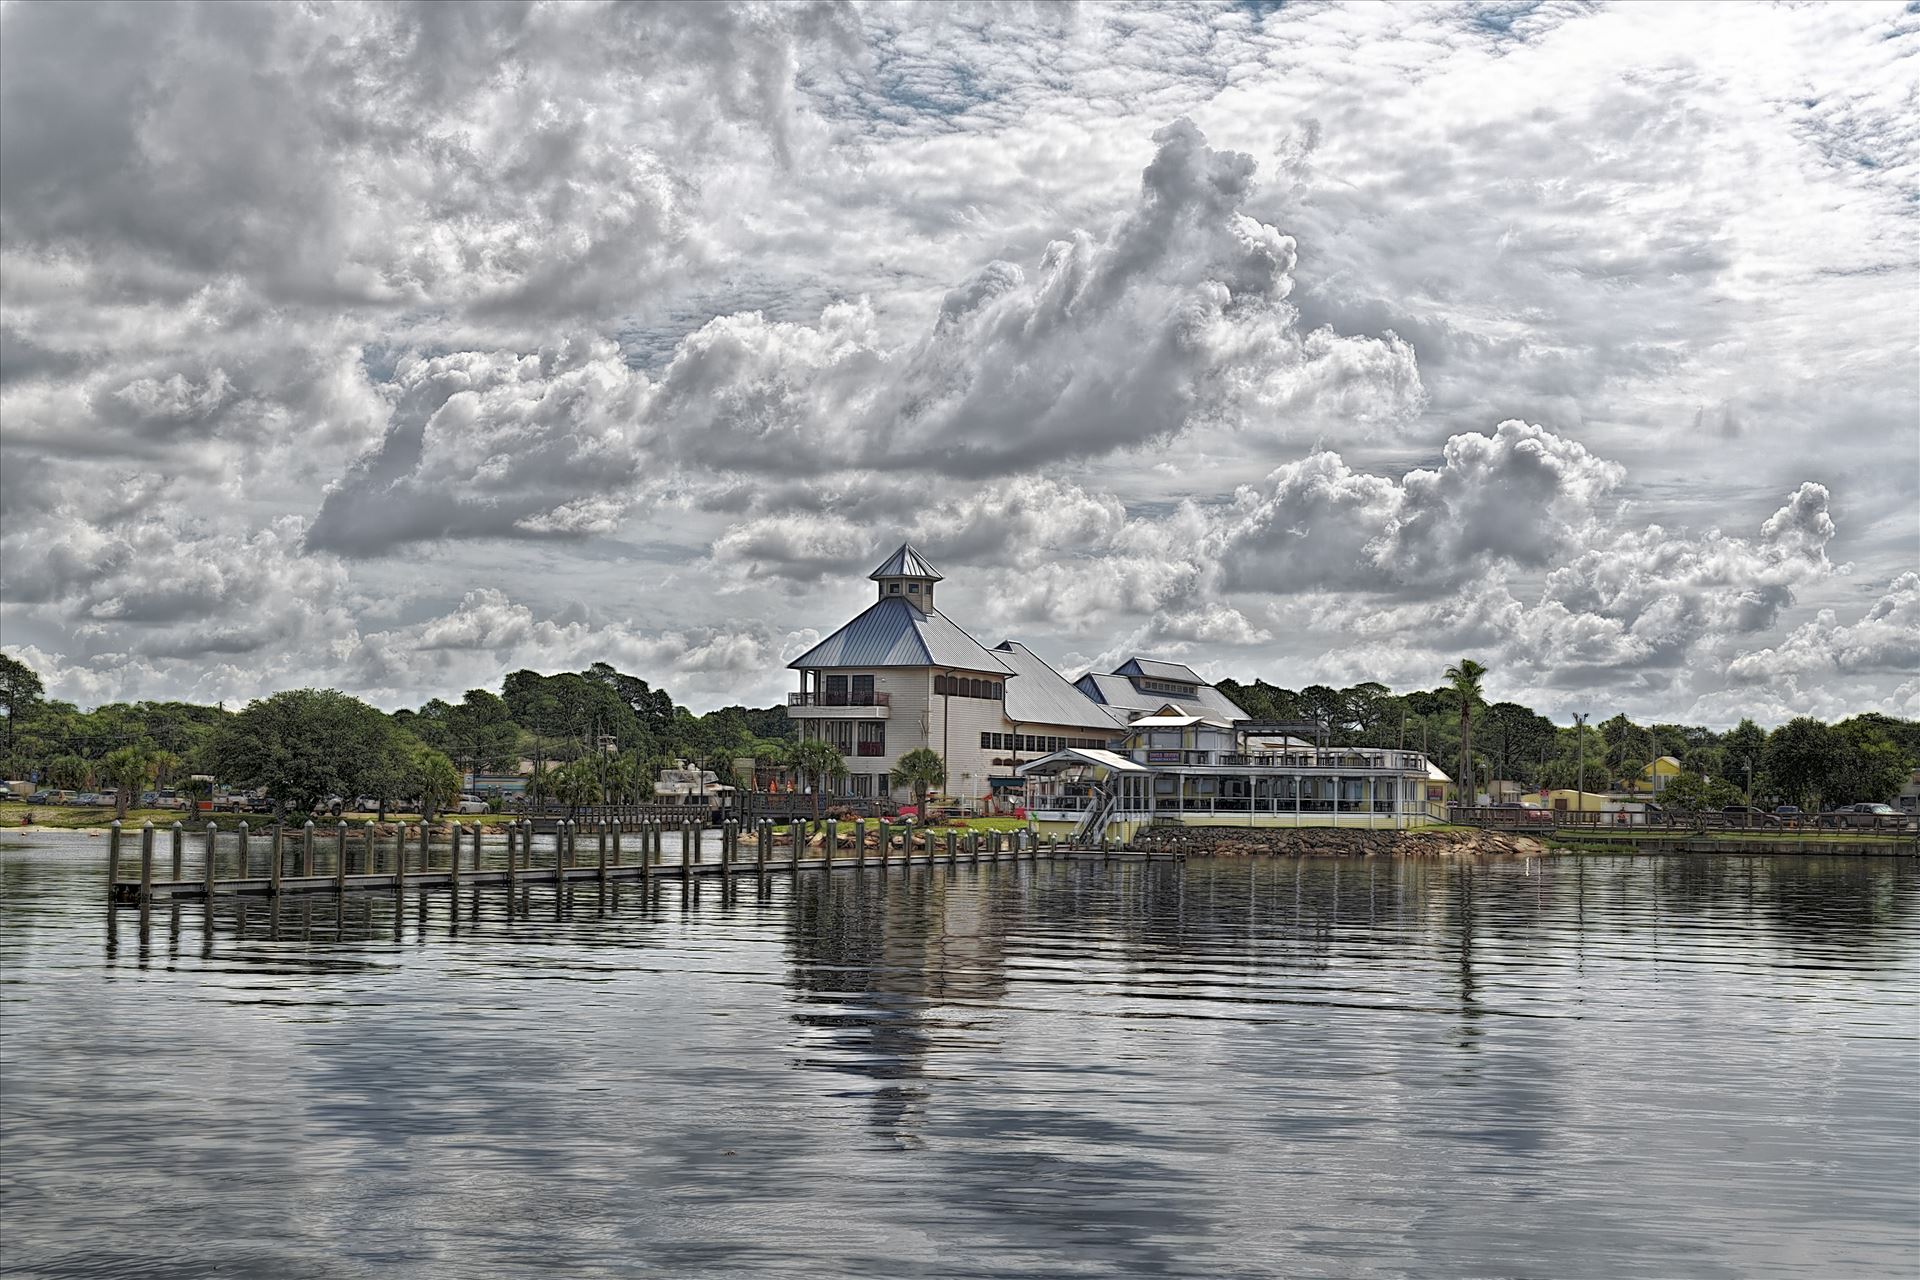 The Shrimp Boat and Uncle Ernie's Bayfront Grill at the St. Andrews Marina 8500109.jpg The Shrimp Boat Restaurant and Uncle Ernie's Bayfront Grill, photo taken from the St. Andrews Marina by Terry Kelly Photography